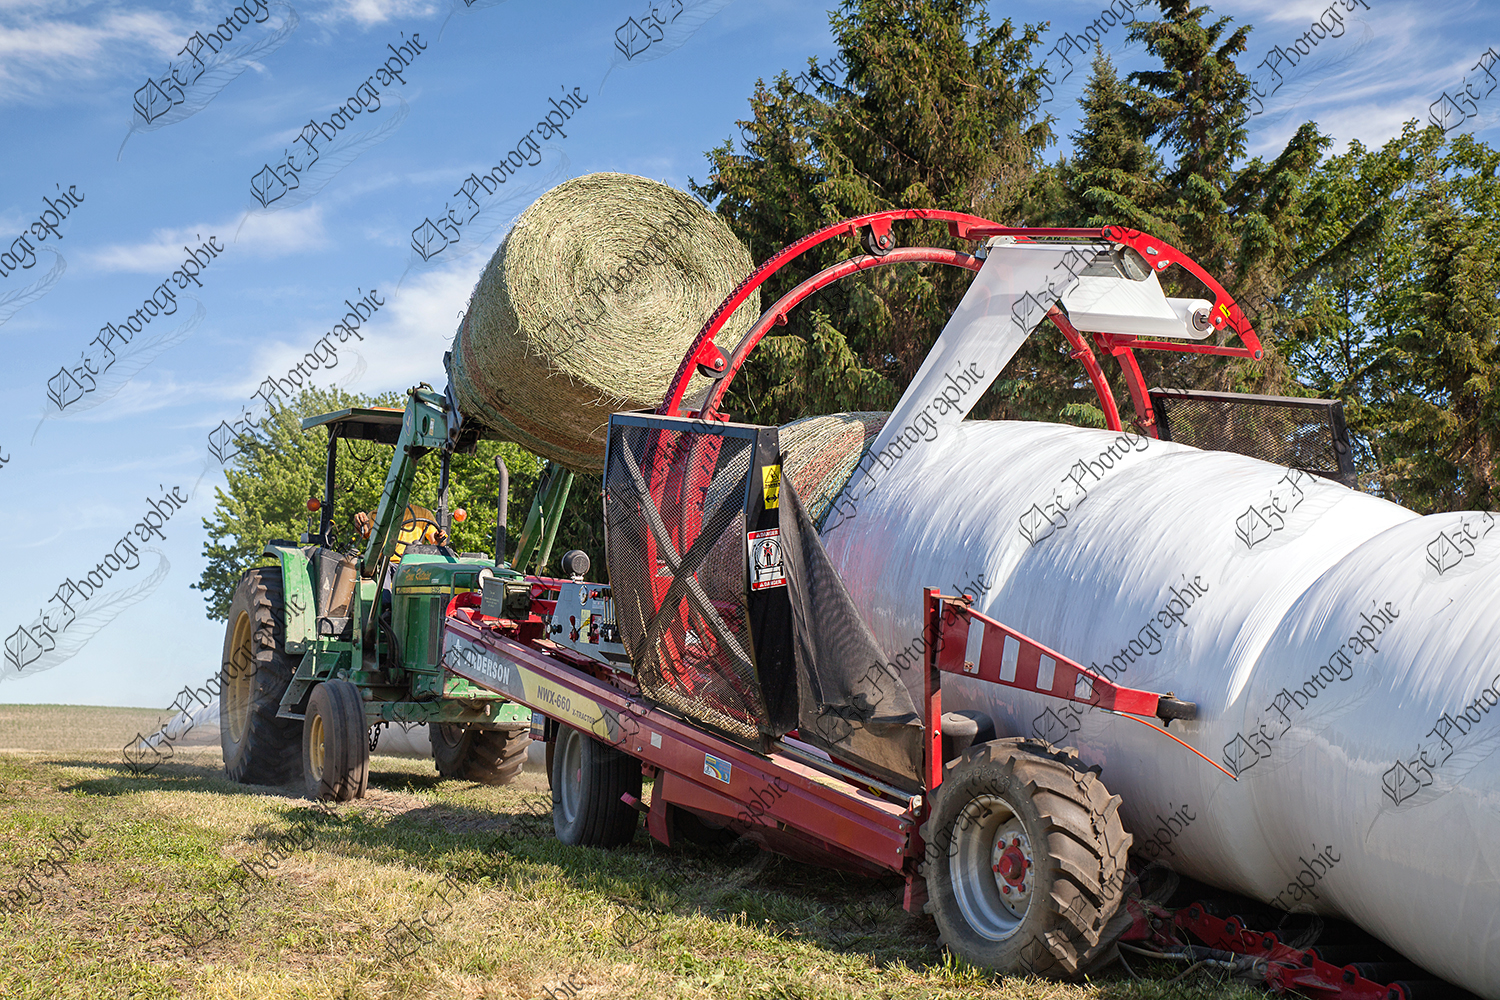 elze_photo_9313_garde_enrobeuse_foin_round_ball_of_hay_tractor